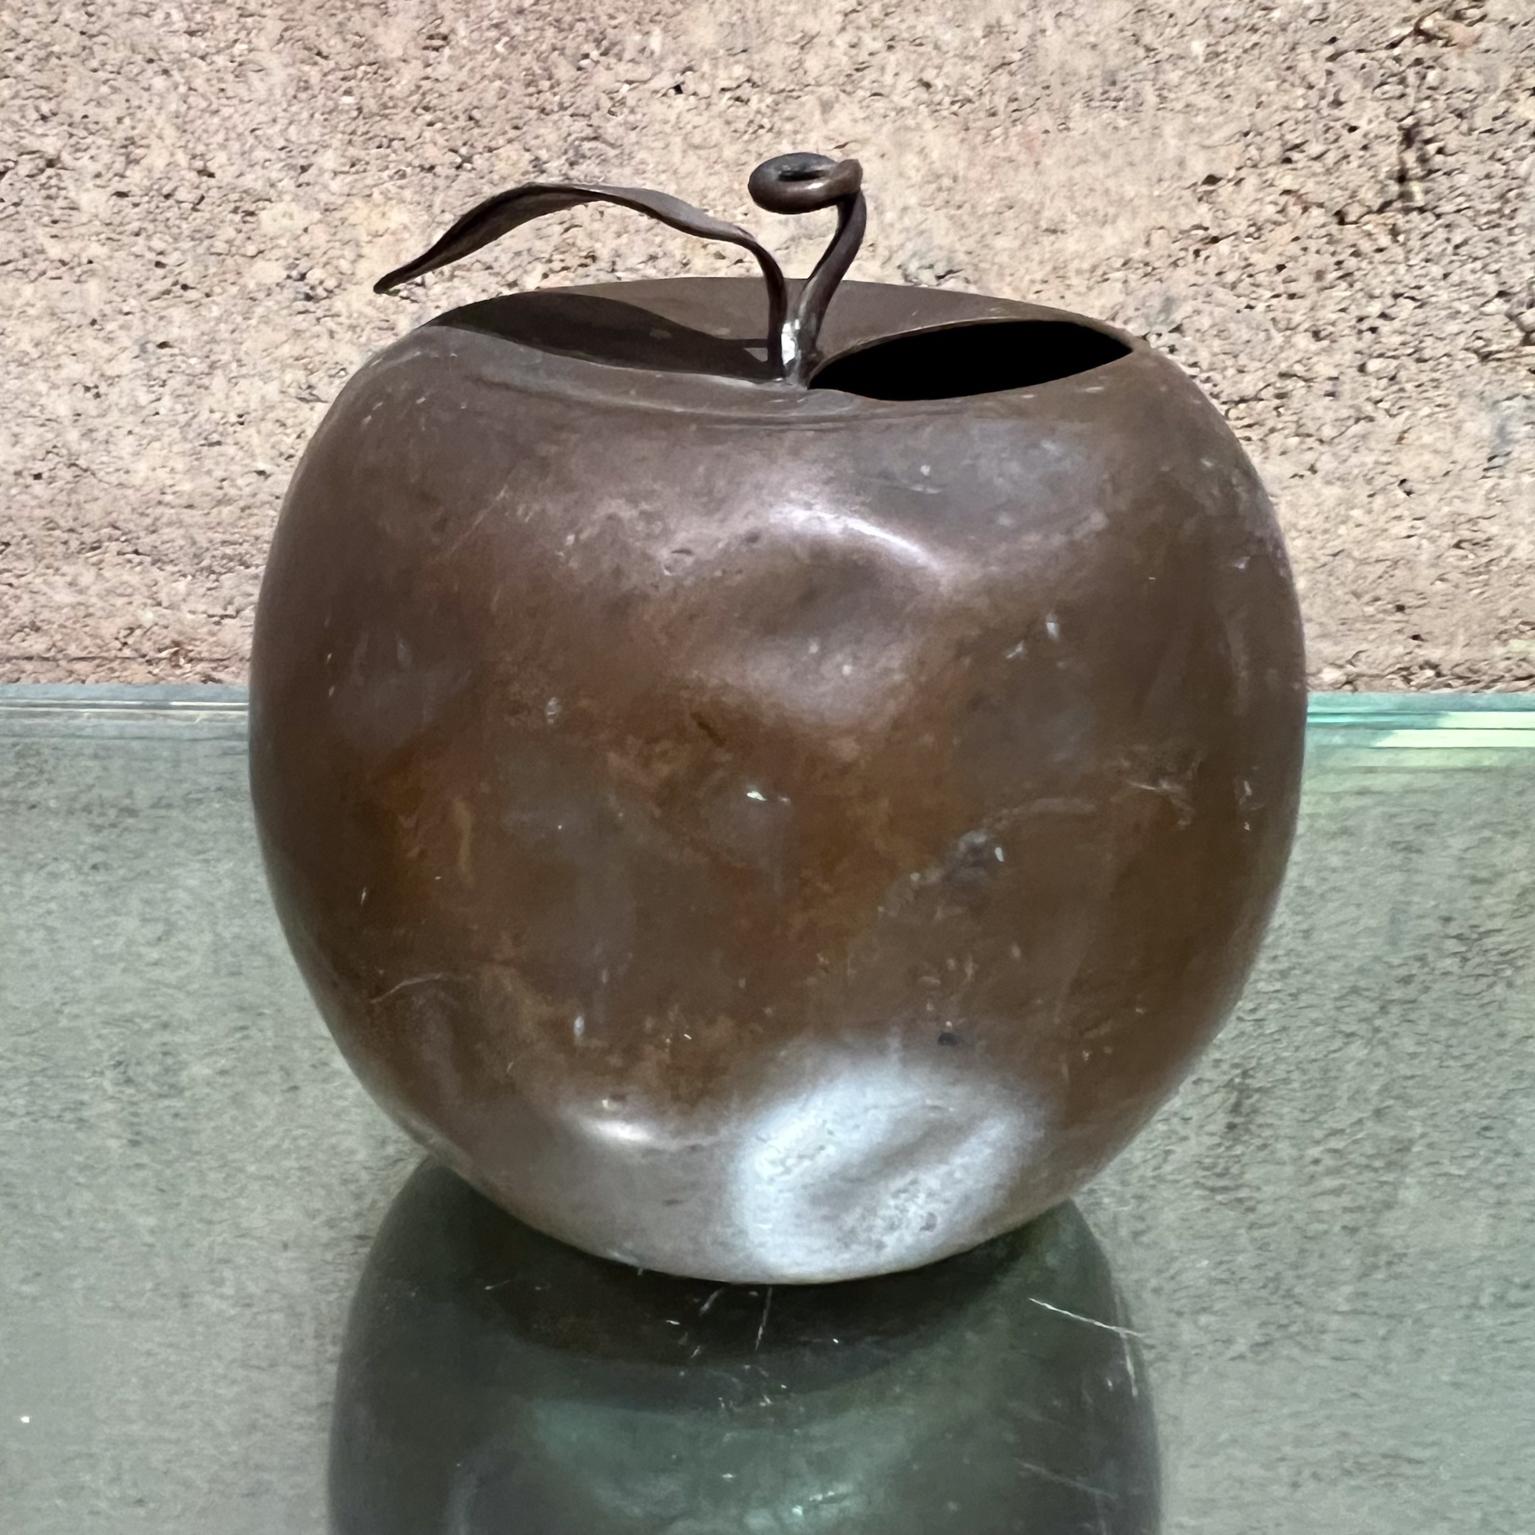 1970s Patinated Brass Apple decorative vintage vessel
3 h x 4 diameter
Stamped, hard to read Cuhema
Original fair vintage unrestored preowned condition.

Has patina dents, dings and scuffs.
Review all images.